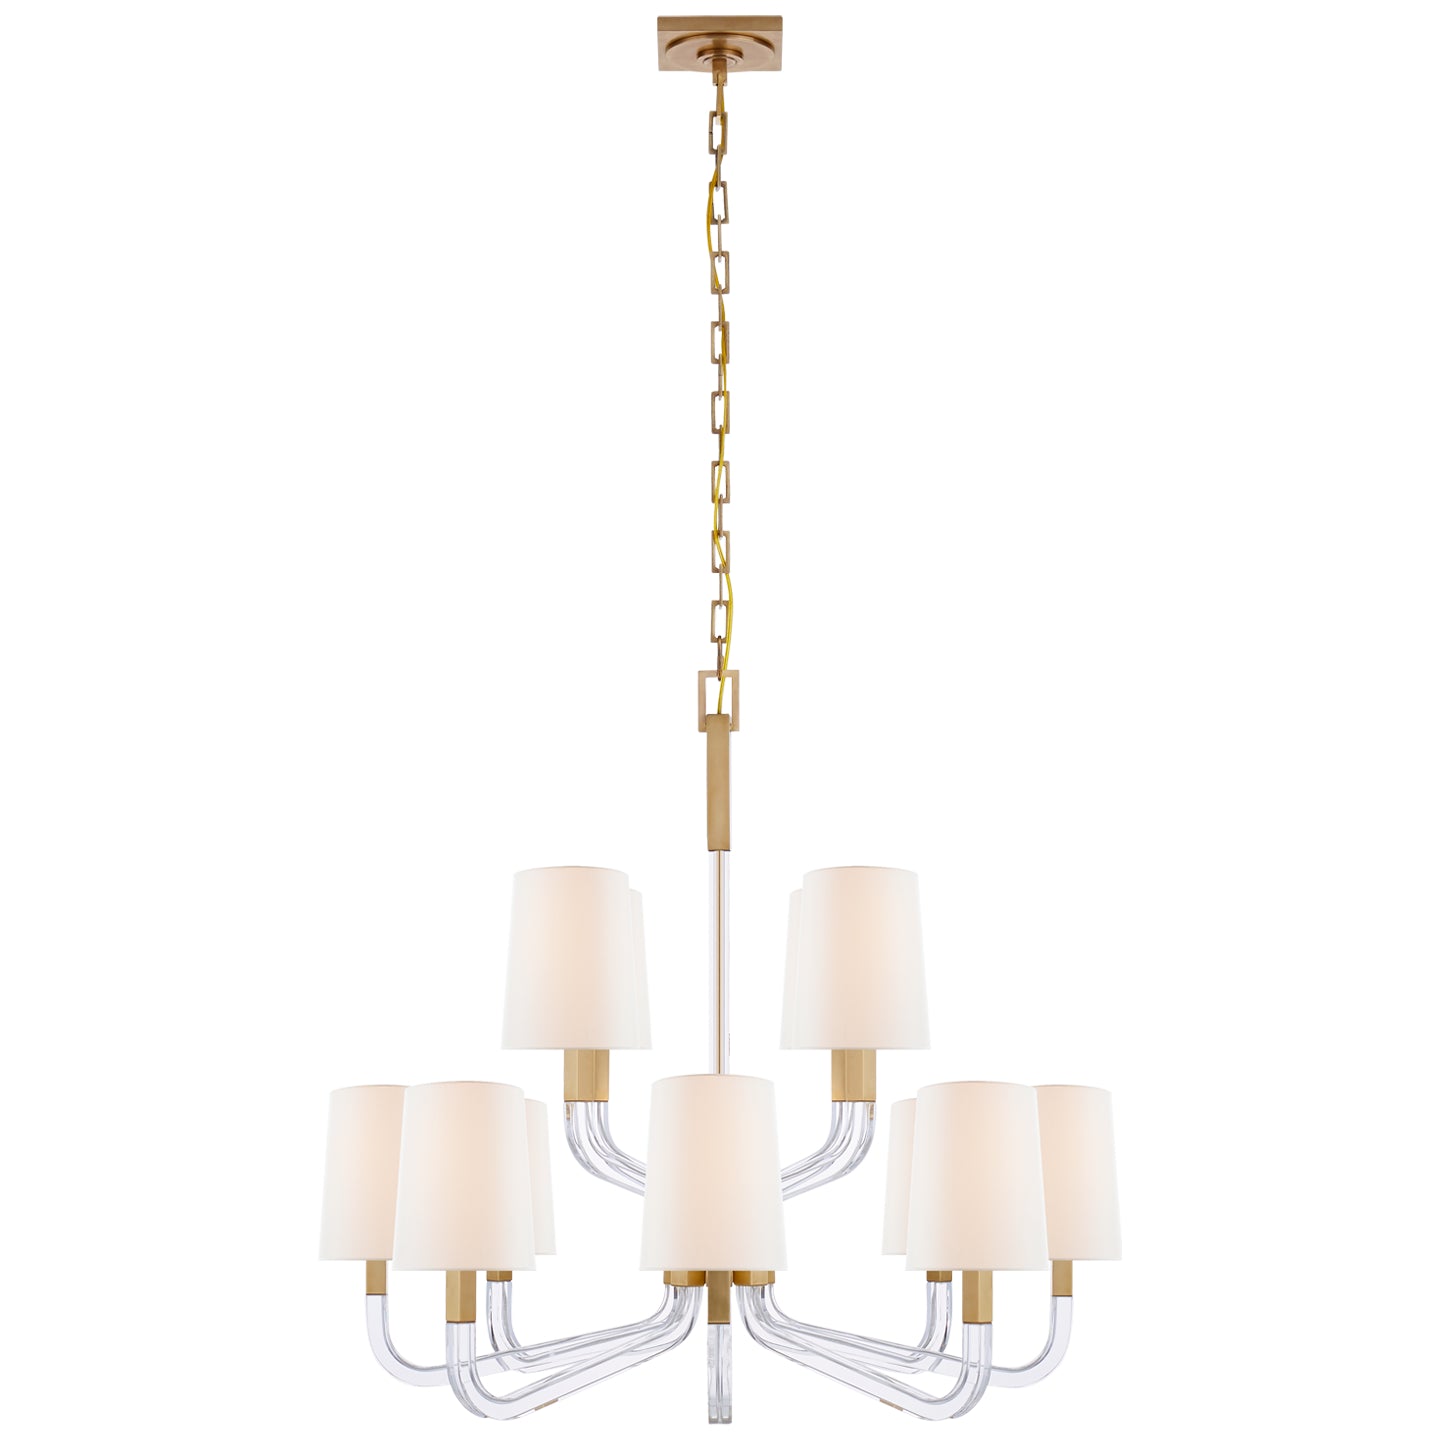 Load image into Gallery viewer, Visual Comfort Signature - CHC 5903AB/CG-L - 12 Light Chandelier - Reagan - Antique-Burnished Brass and Crystal
